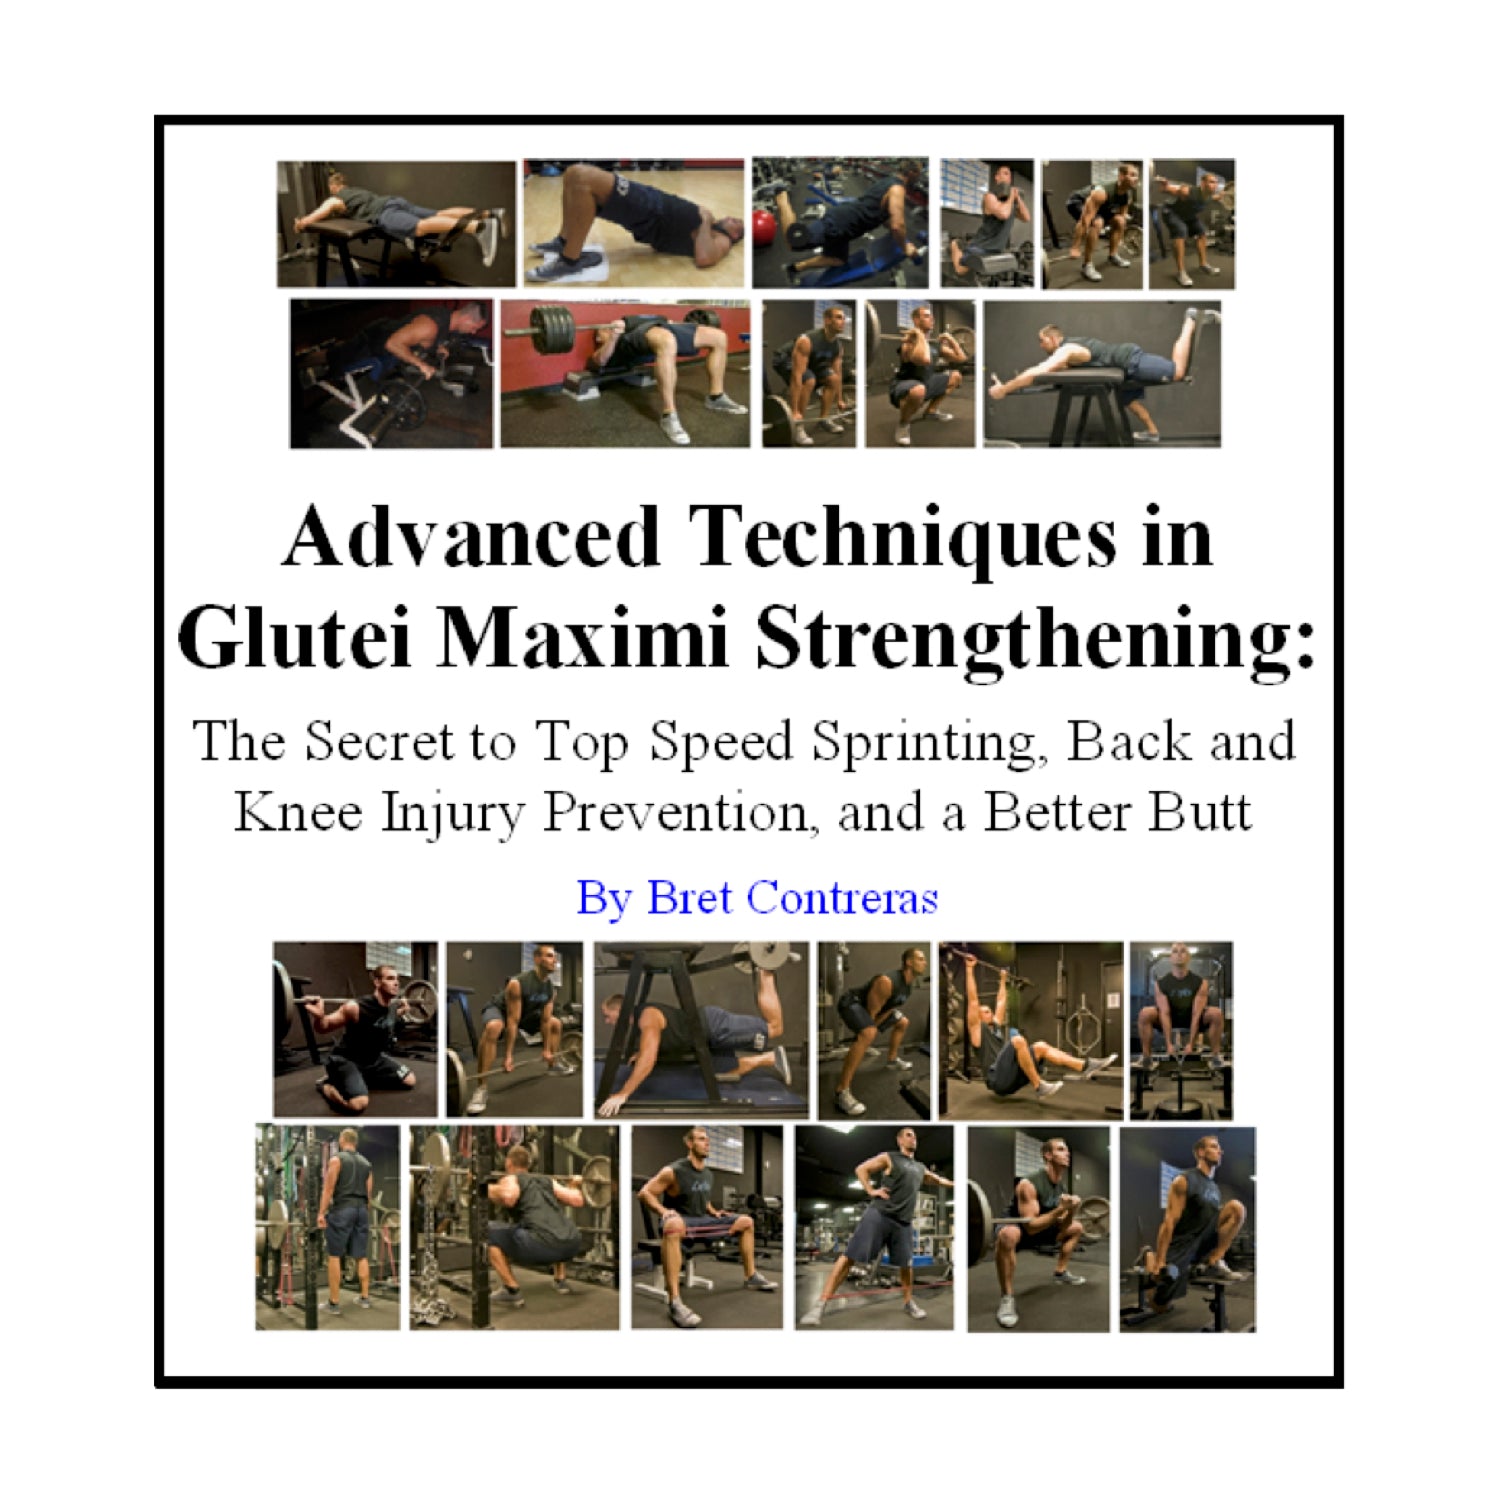 advanced techniques in glutei maximi strengthening